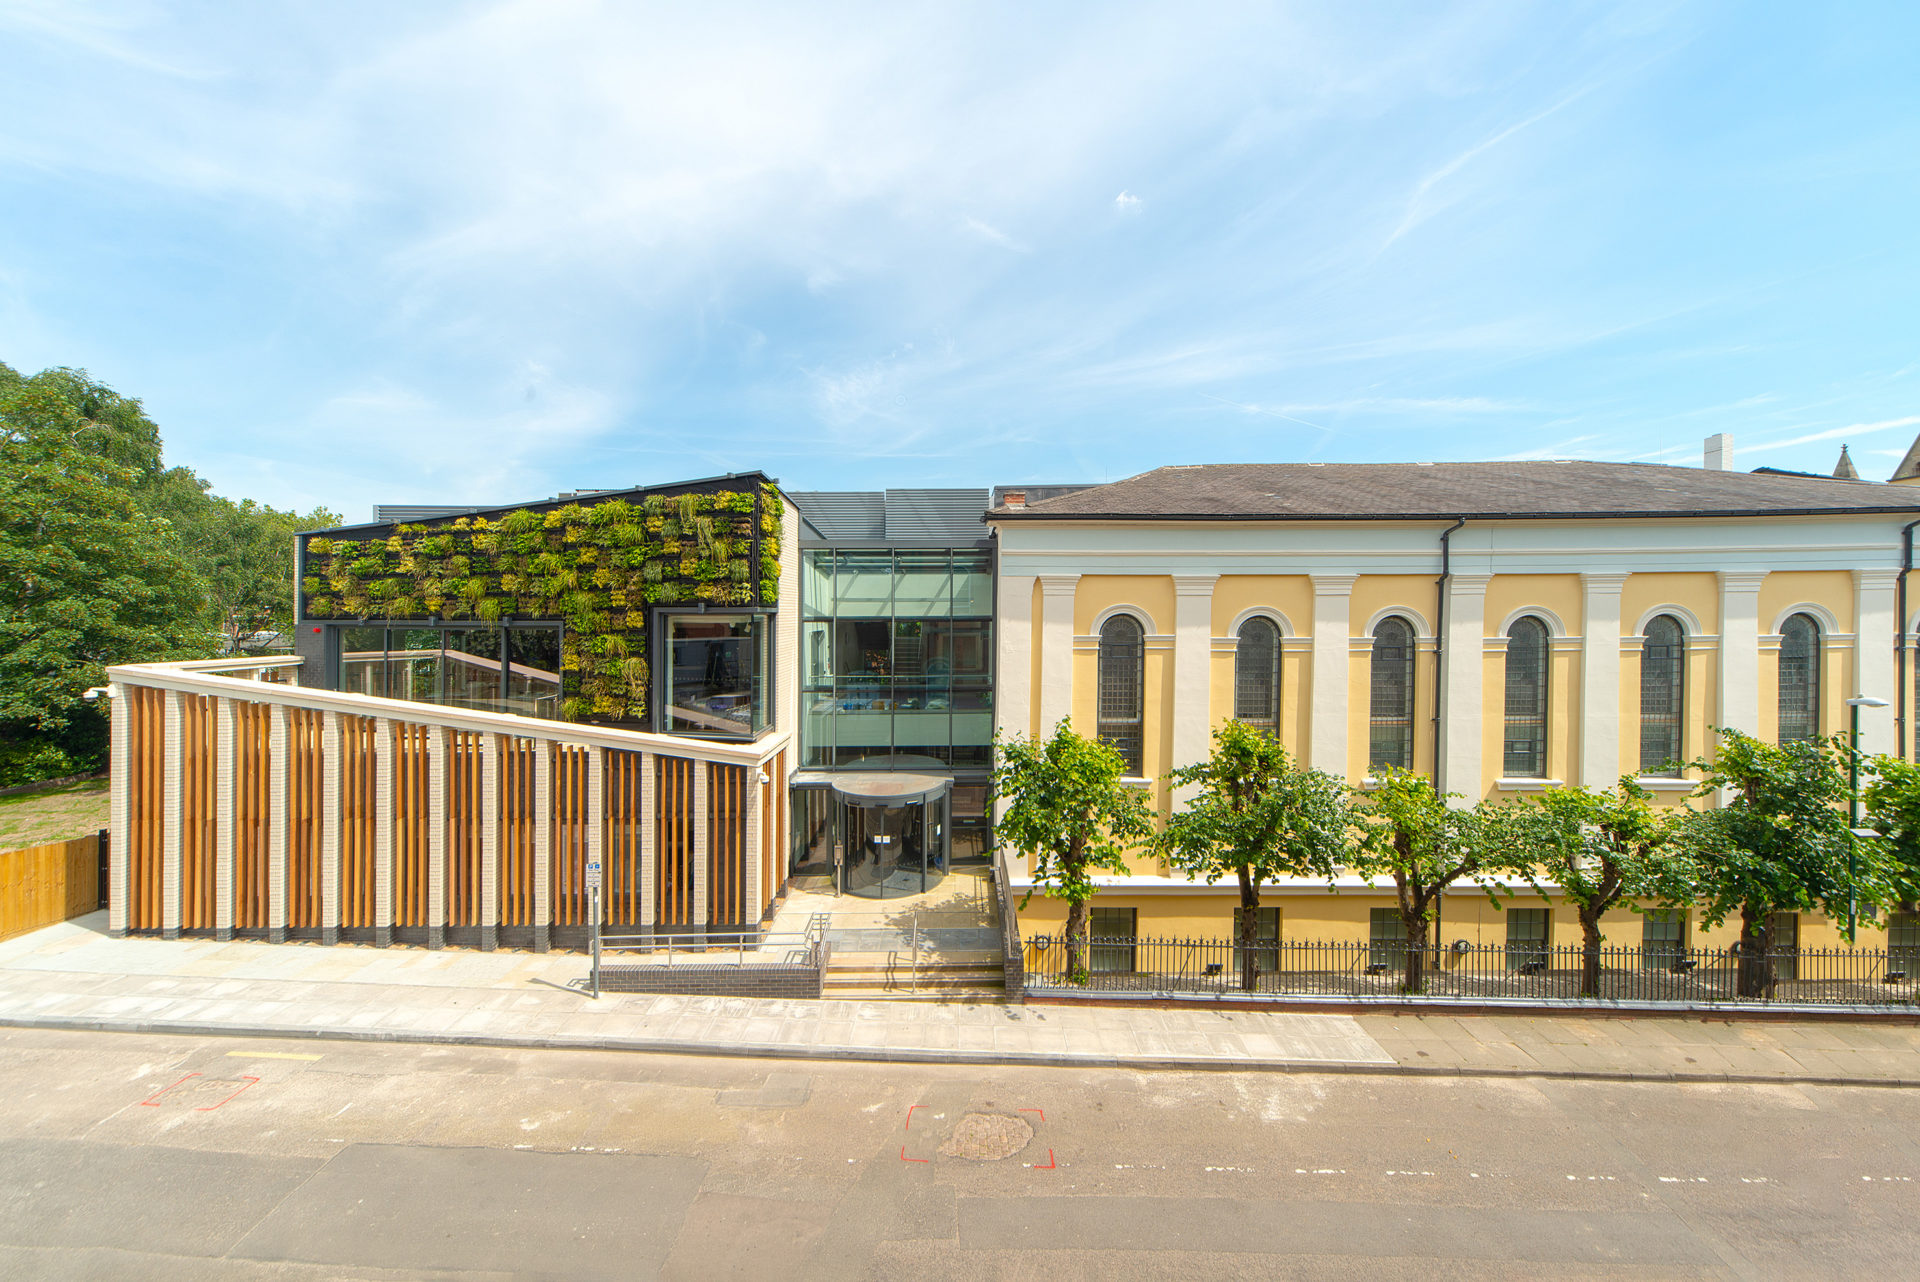 External image of the new University Hall building, clearly showing the green wall and glass vestibule